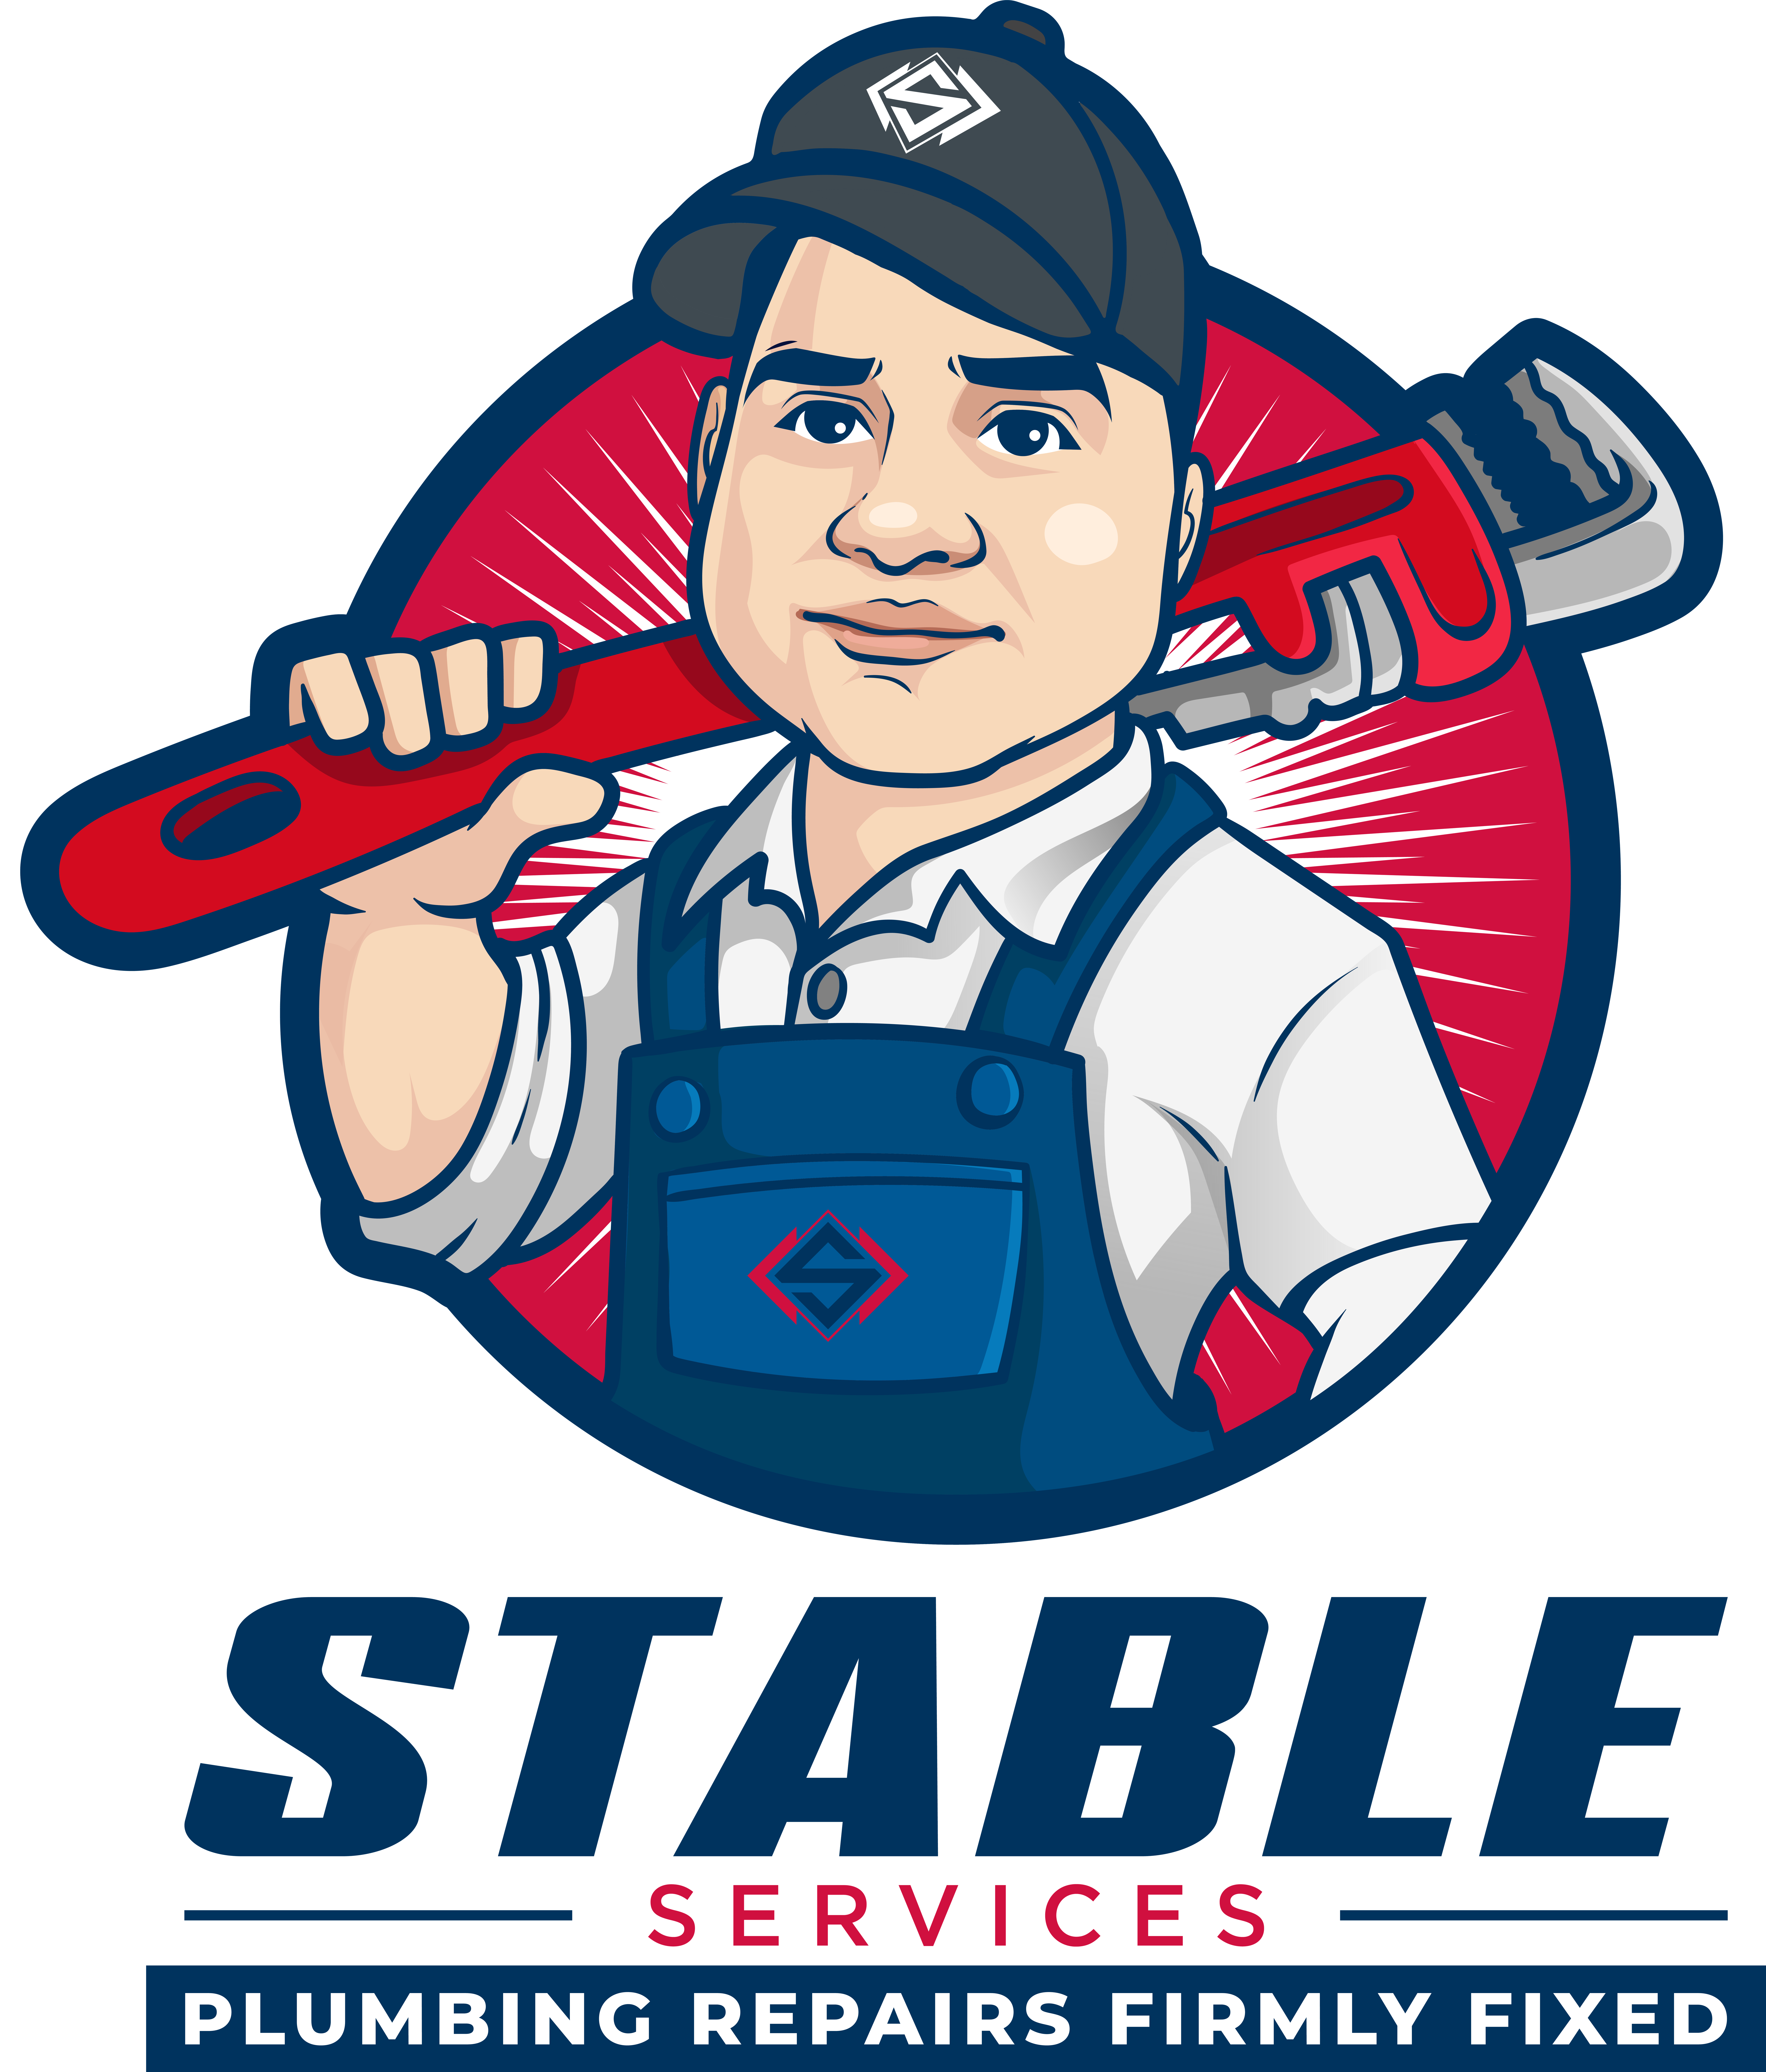 Saturday Business Feature: Stable Services